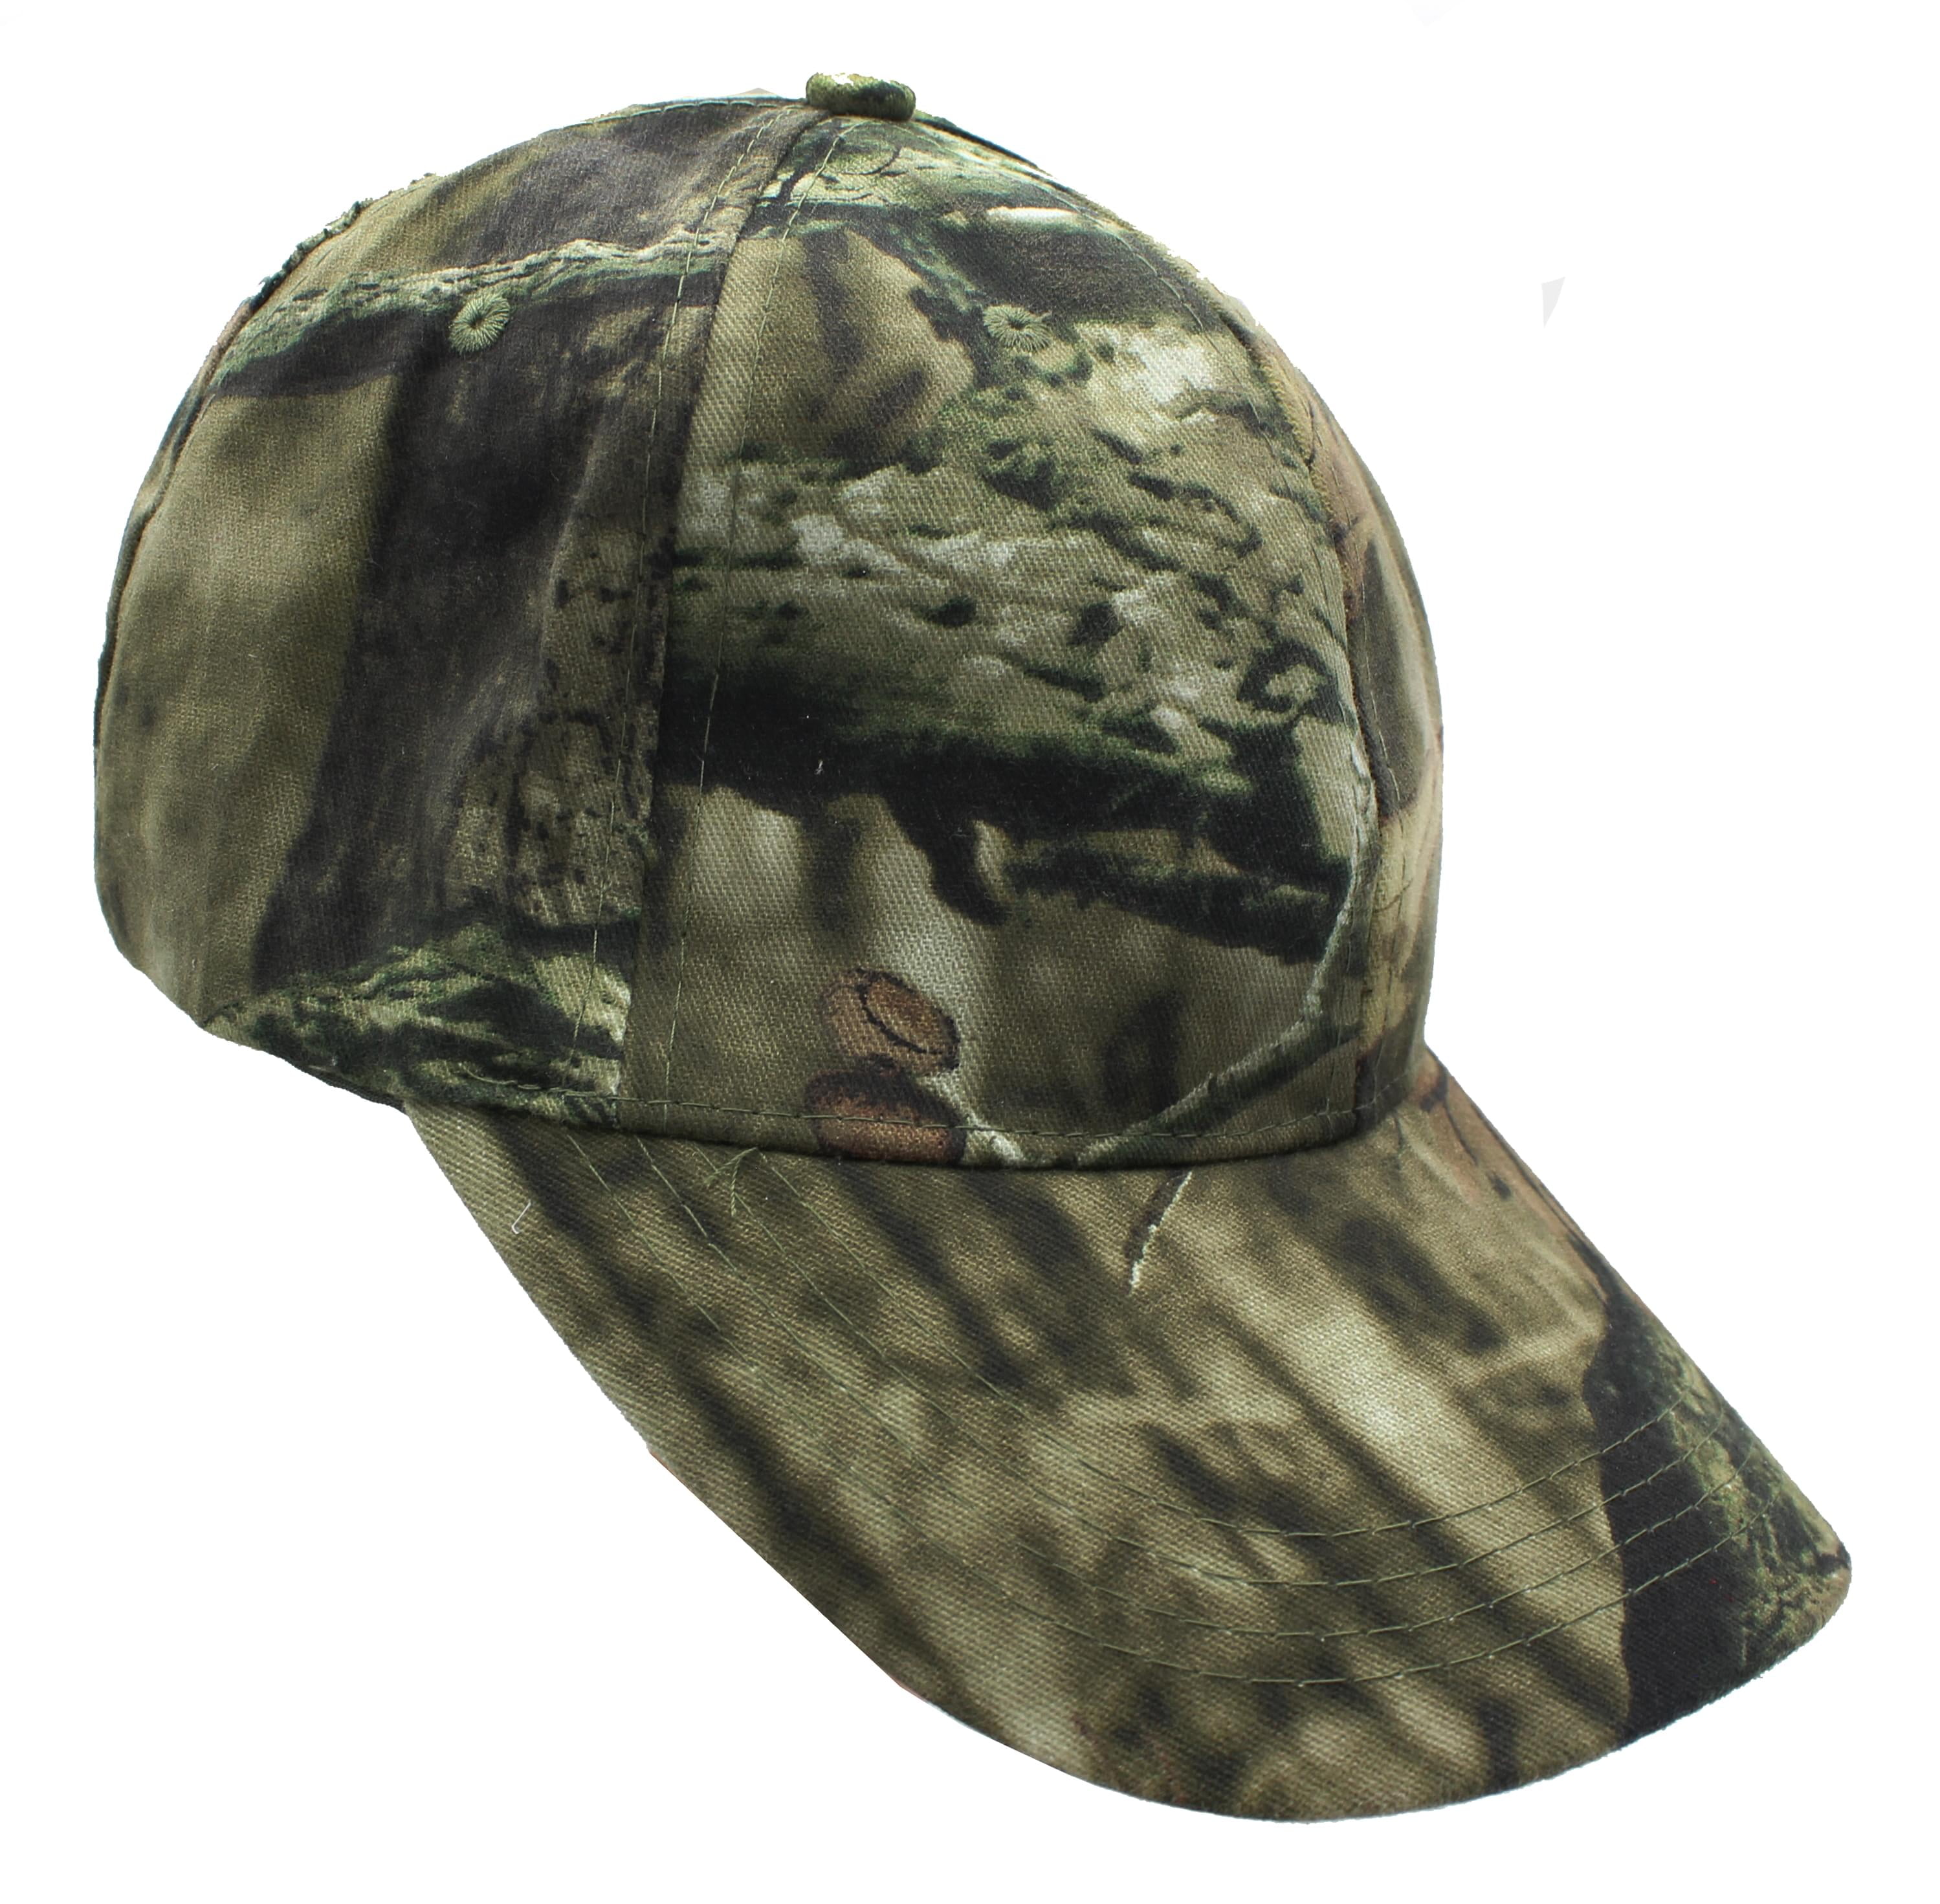 Duck Hunter Camouflage Costume Hat Adult One Size Fits Most | Walmart ...